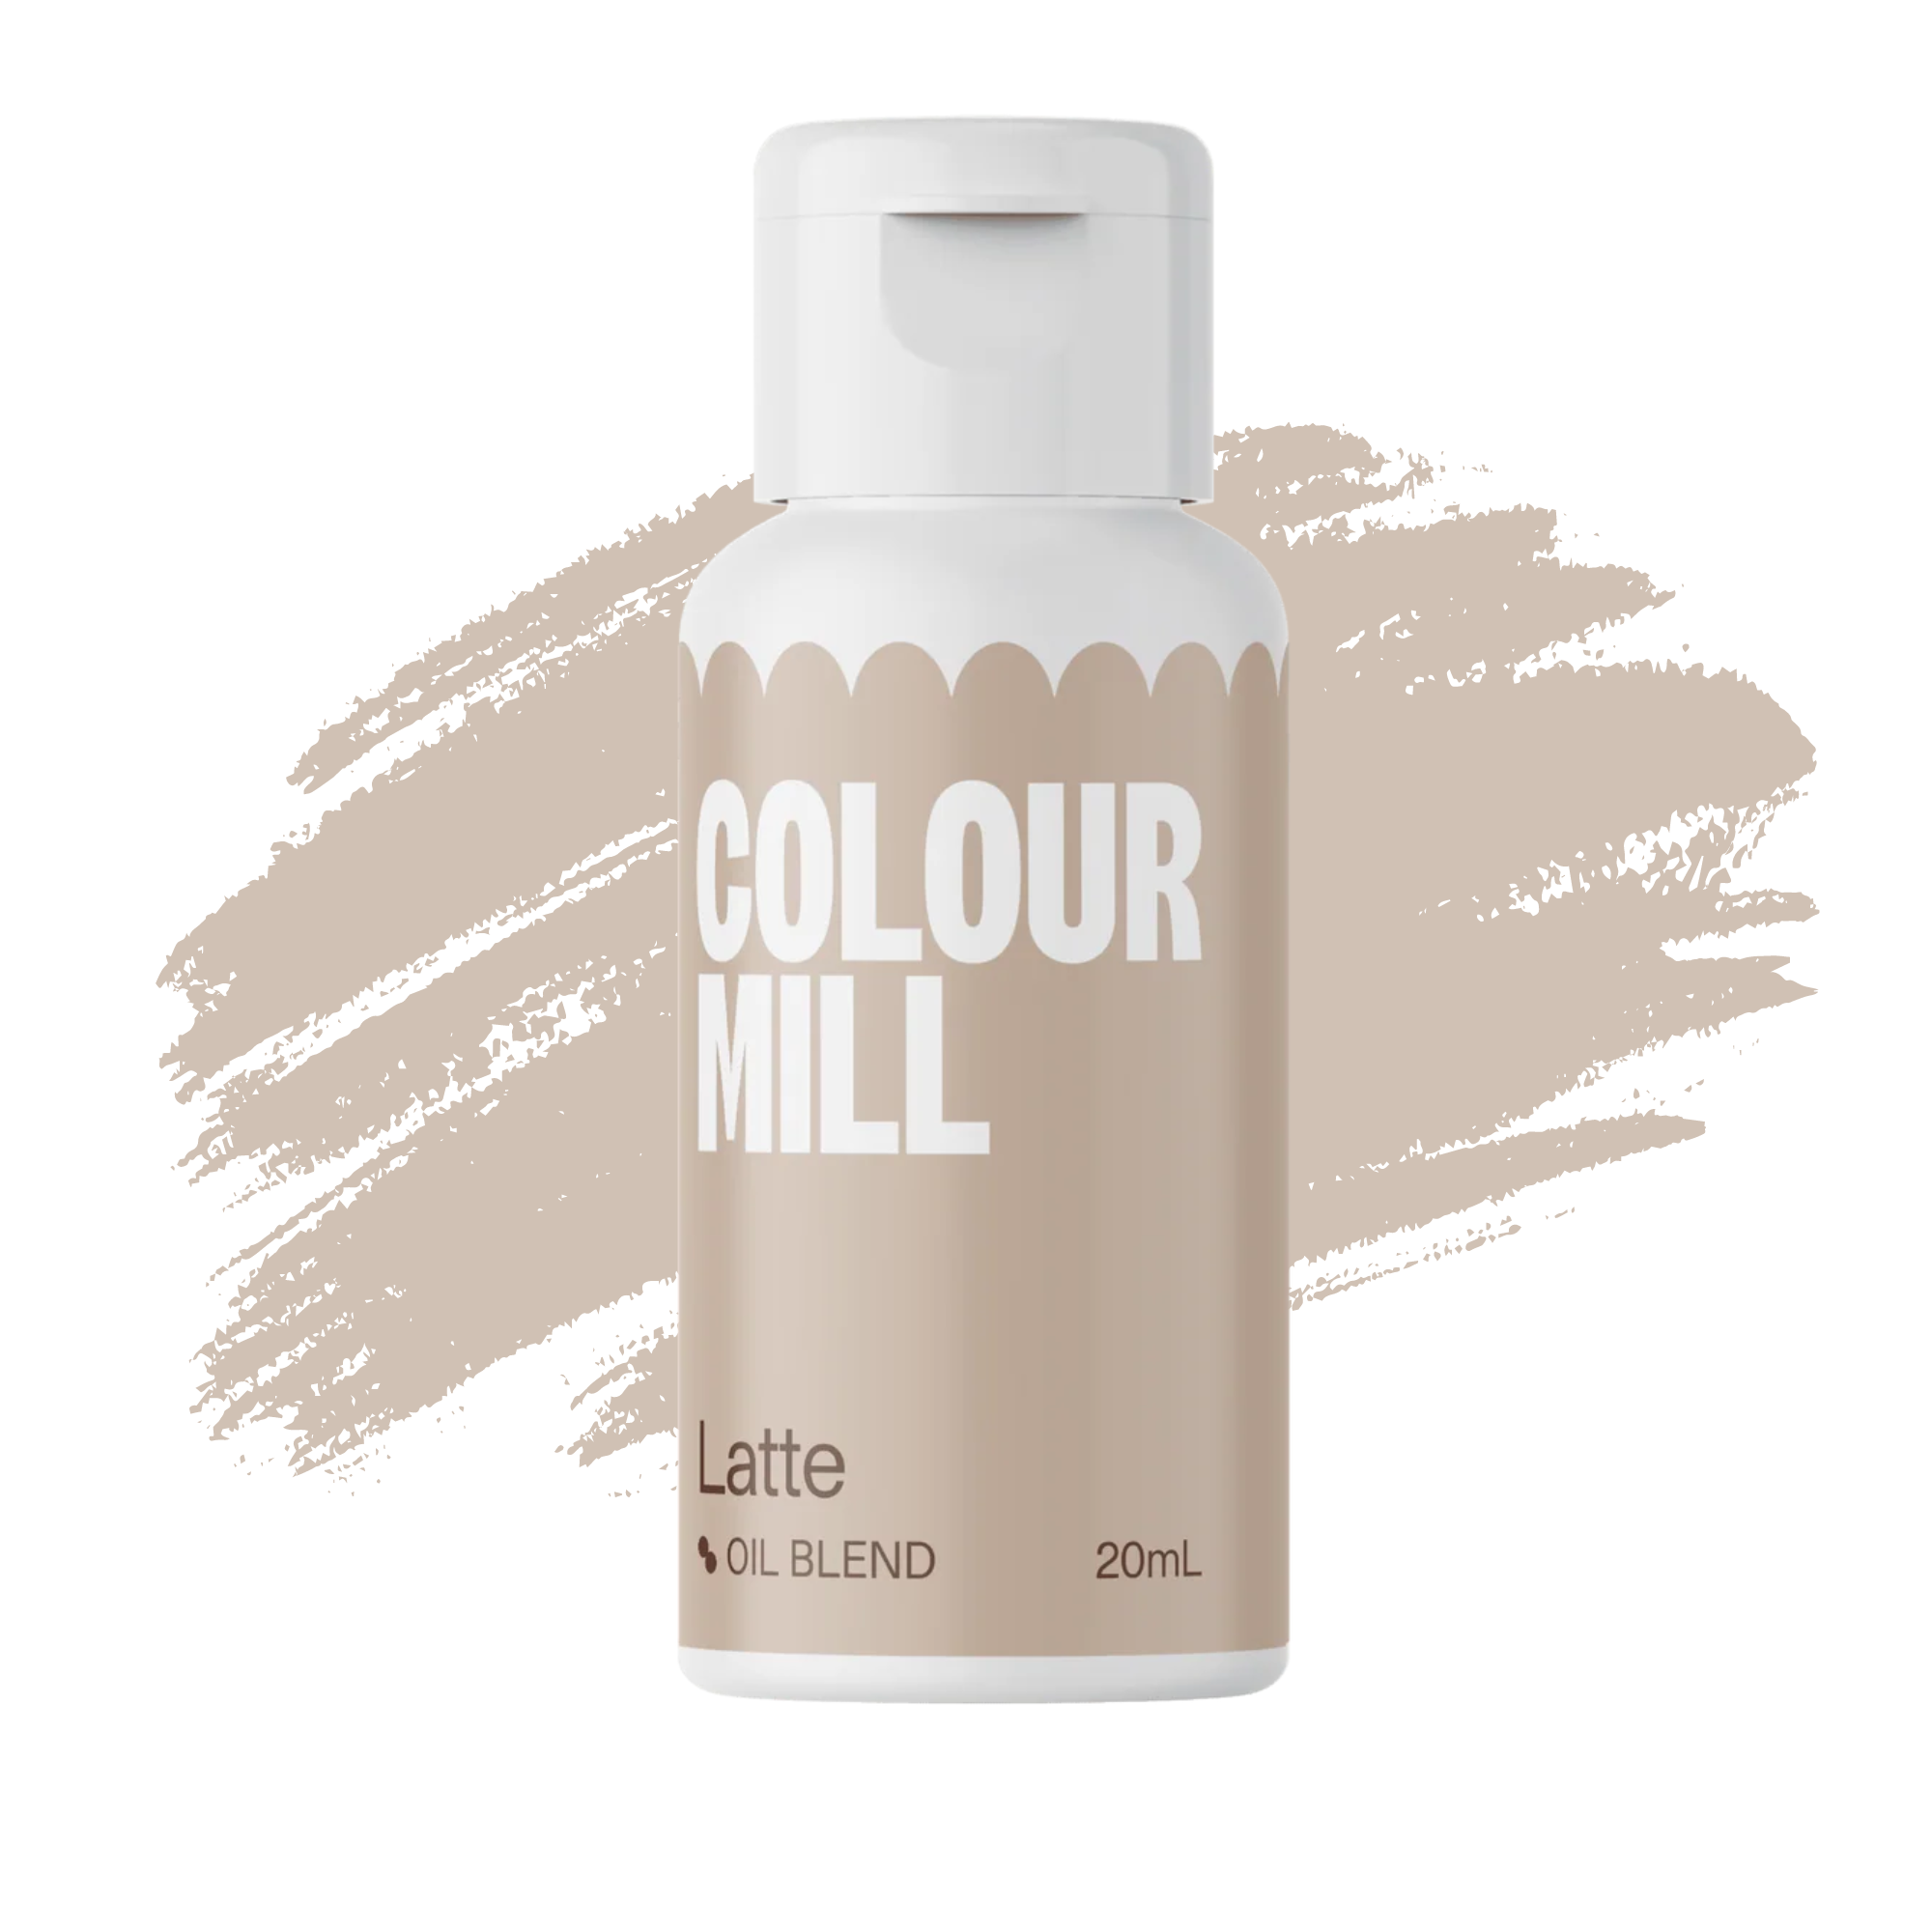 Colour Mill Latte Food Colouring (Oil Based)